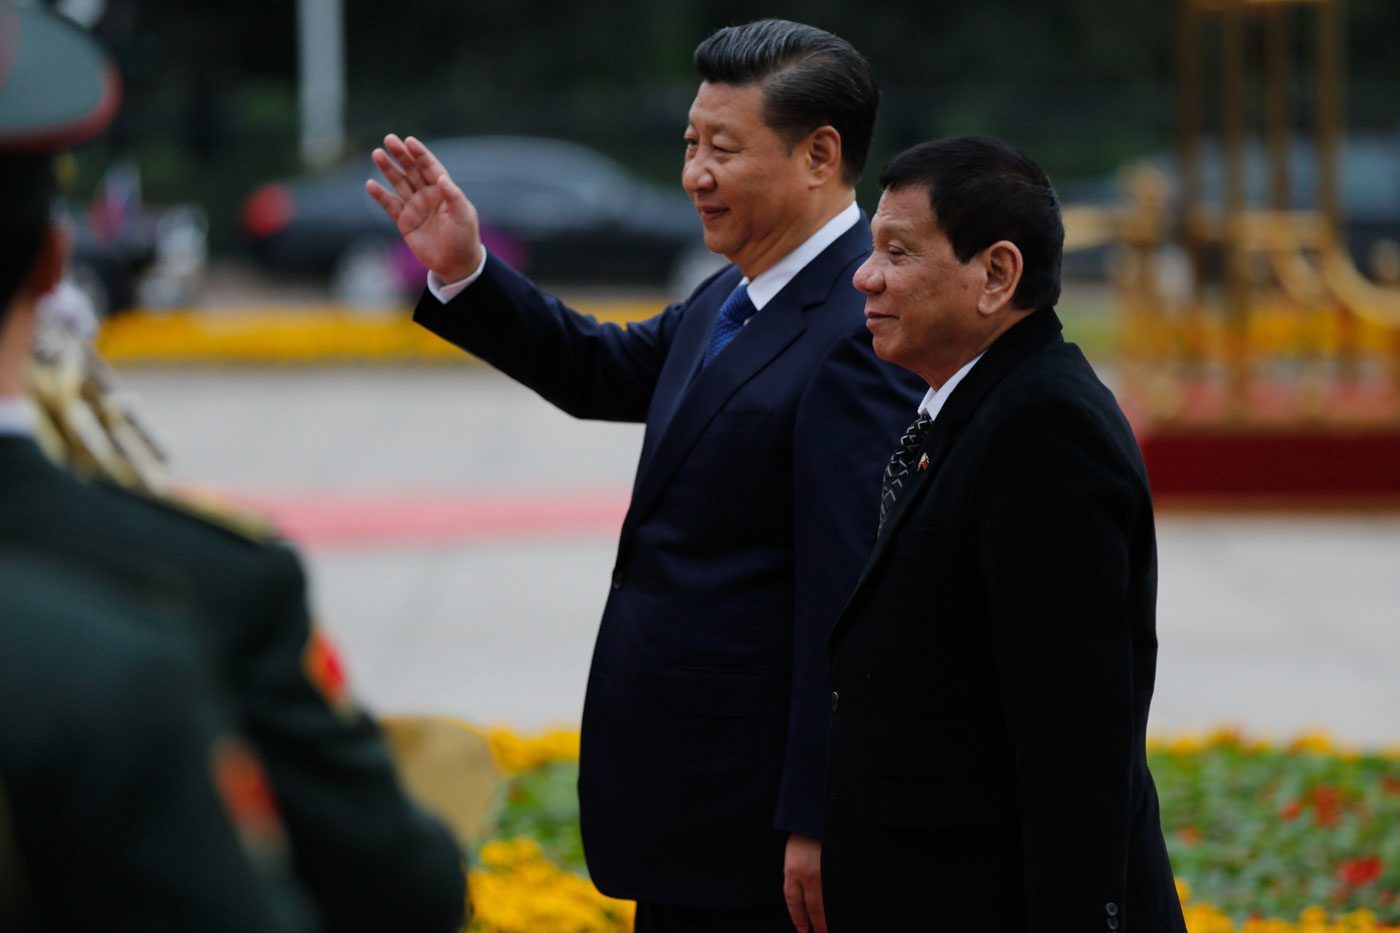 Enemy at sea, friend of the chief: Philippine military navigates ties with China